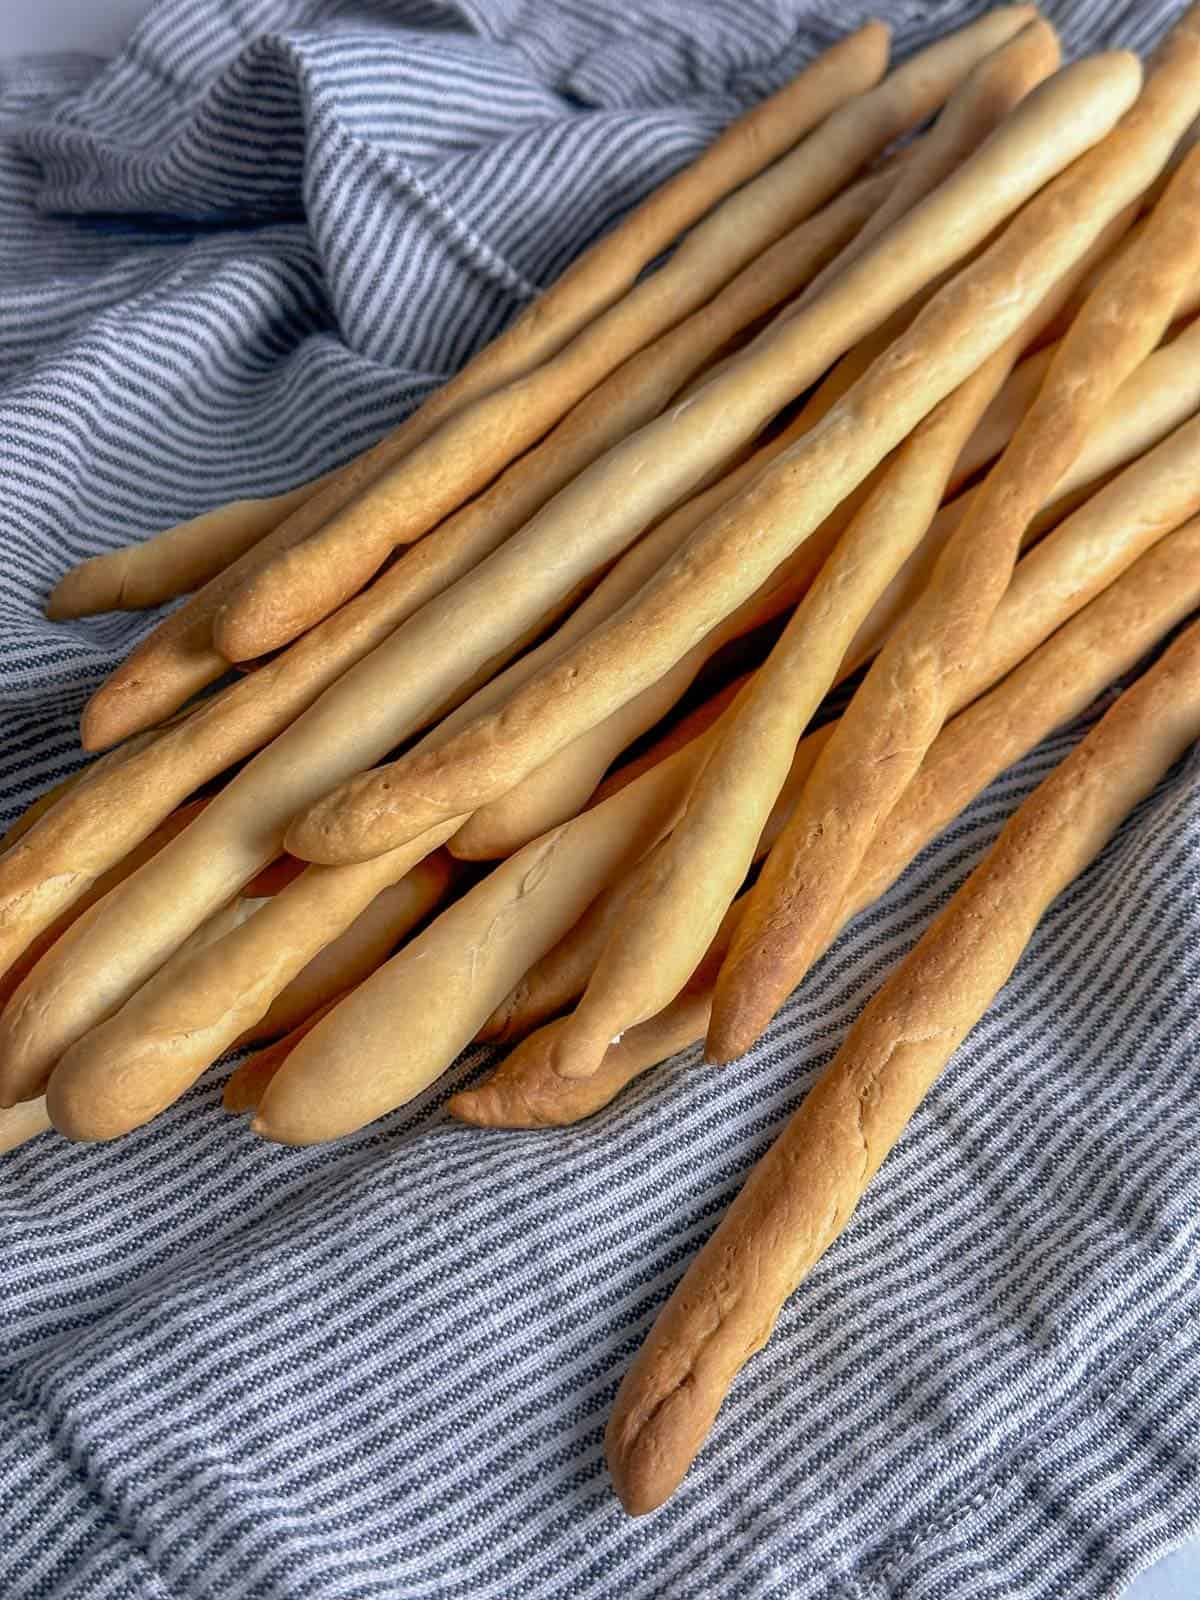 a freshly baked of homemade grissini on a striped kitchen towel